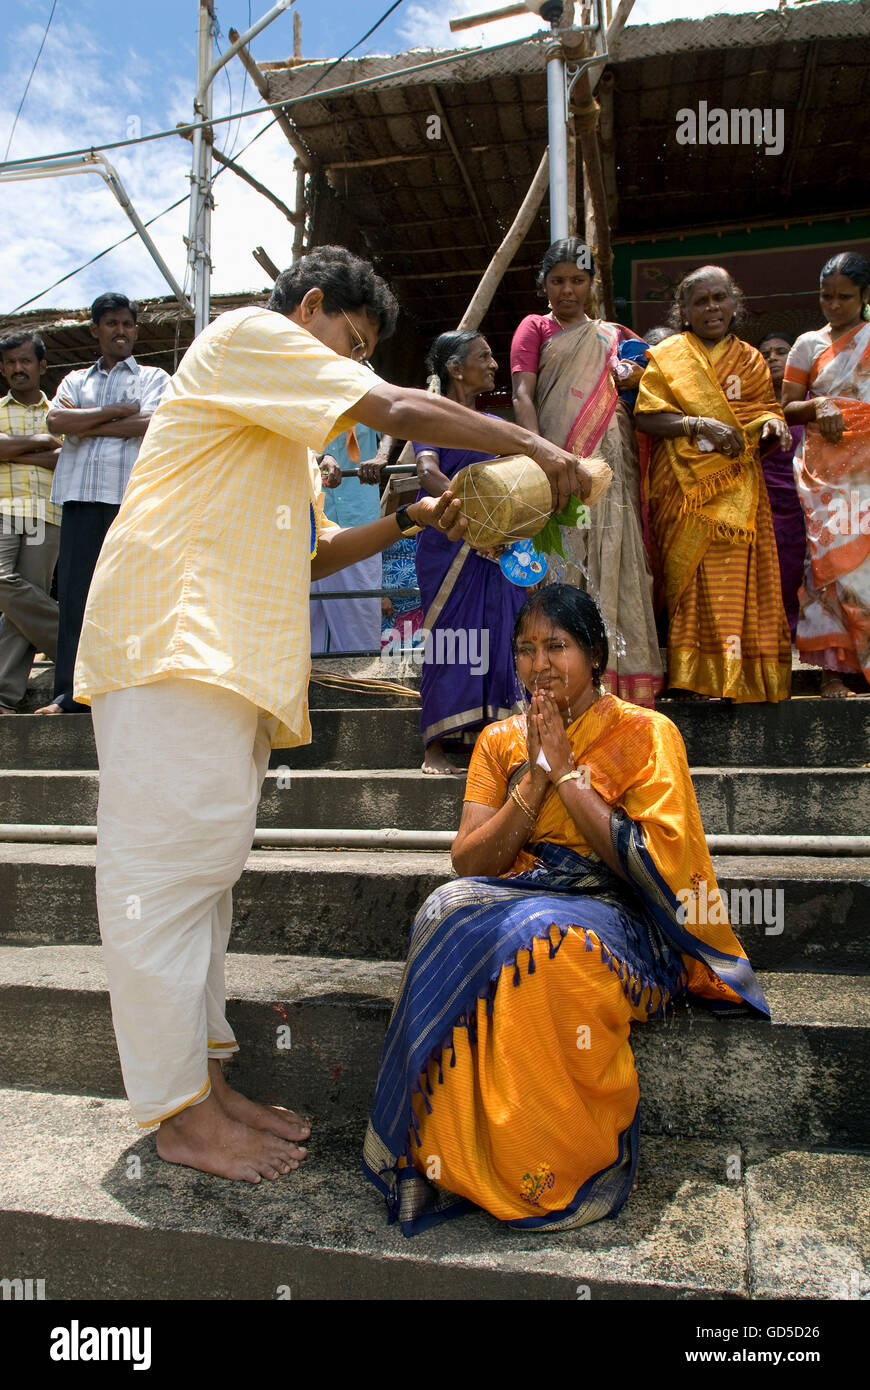 Priest performing a ritual Stock Photo